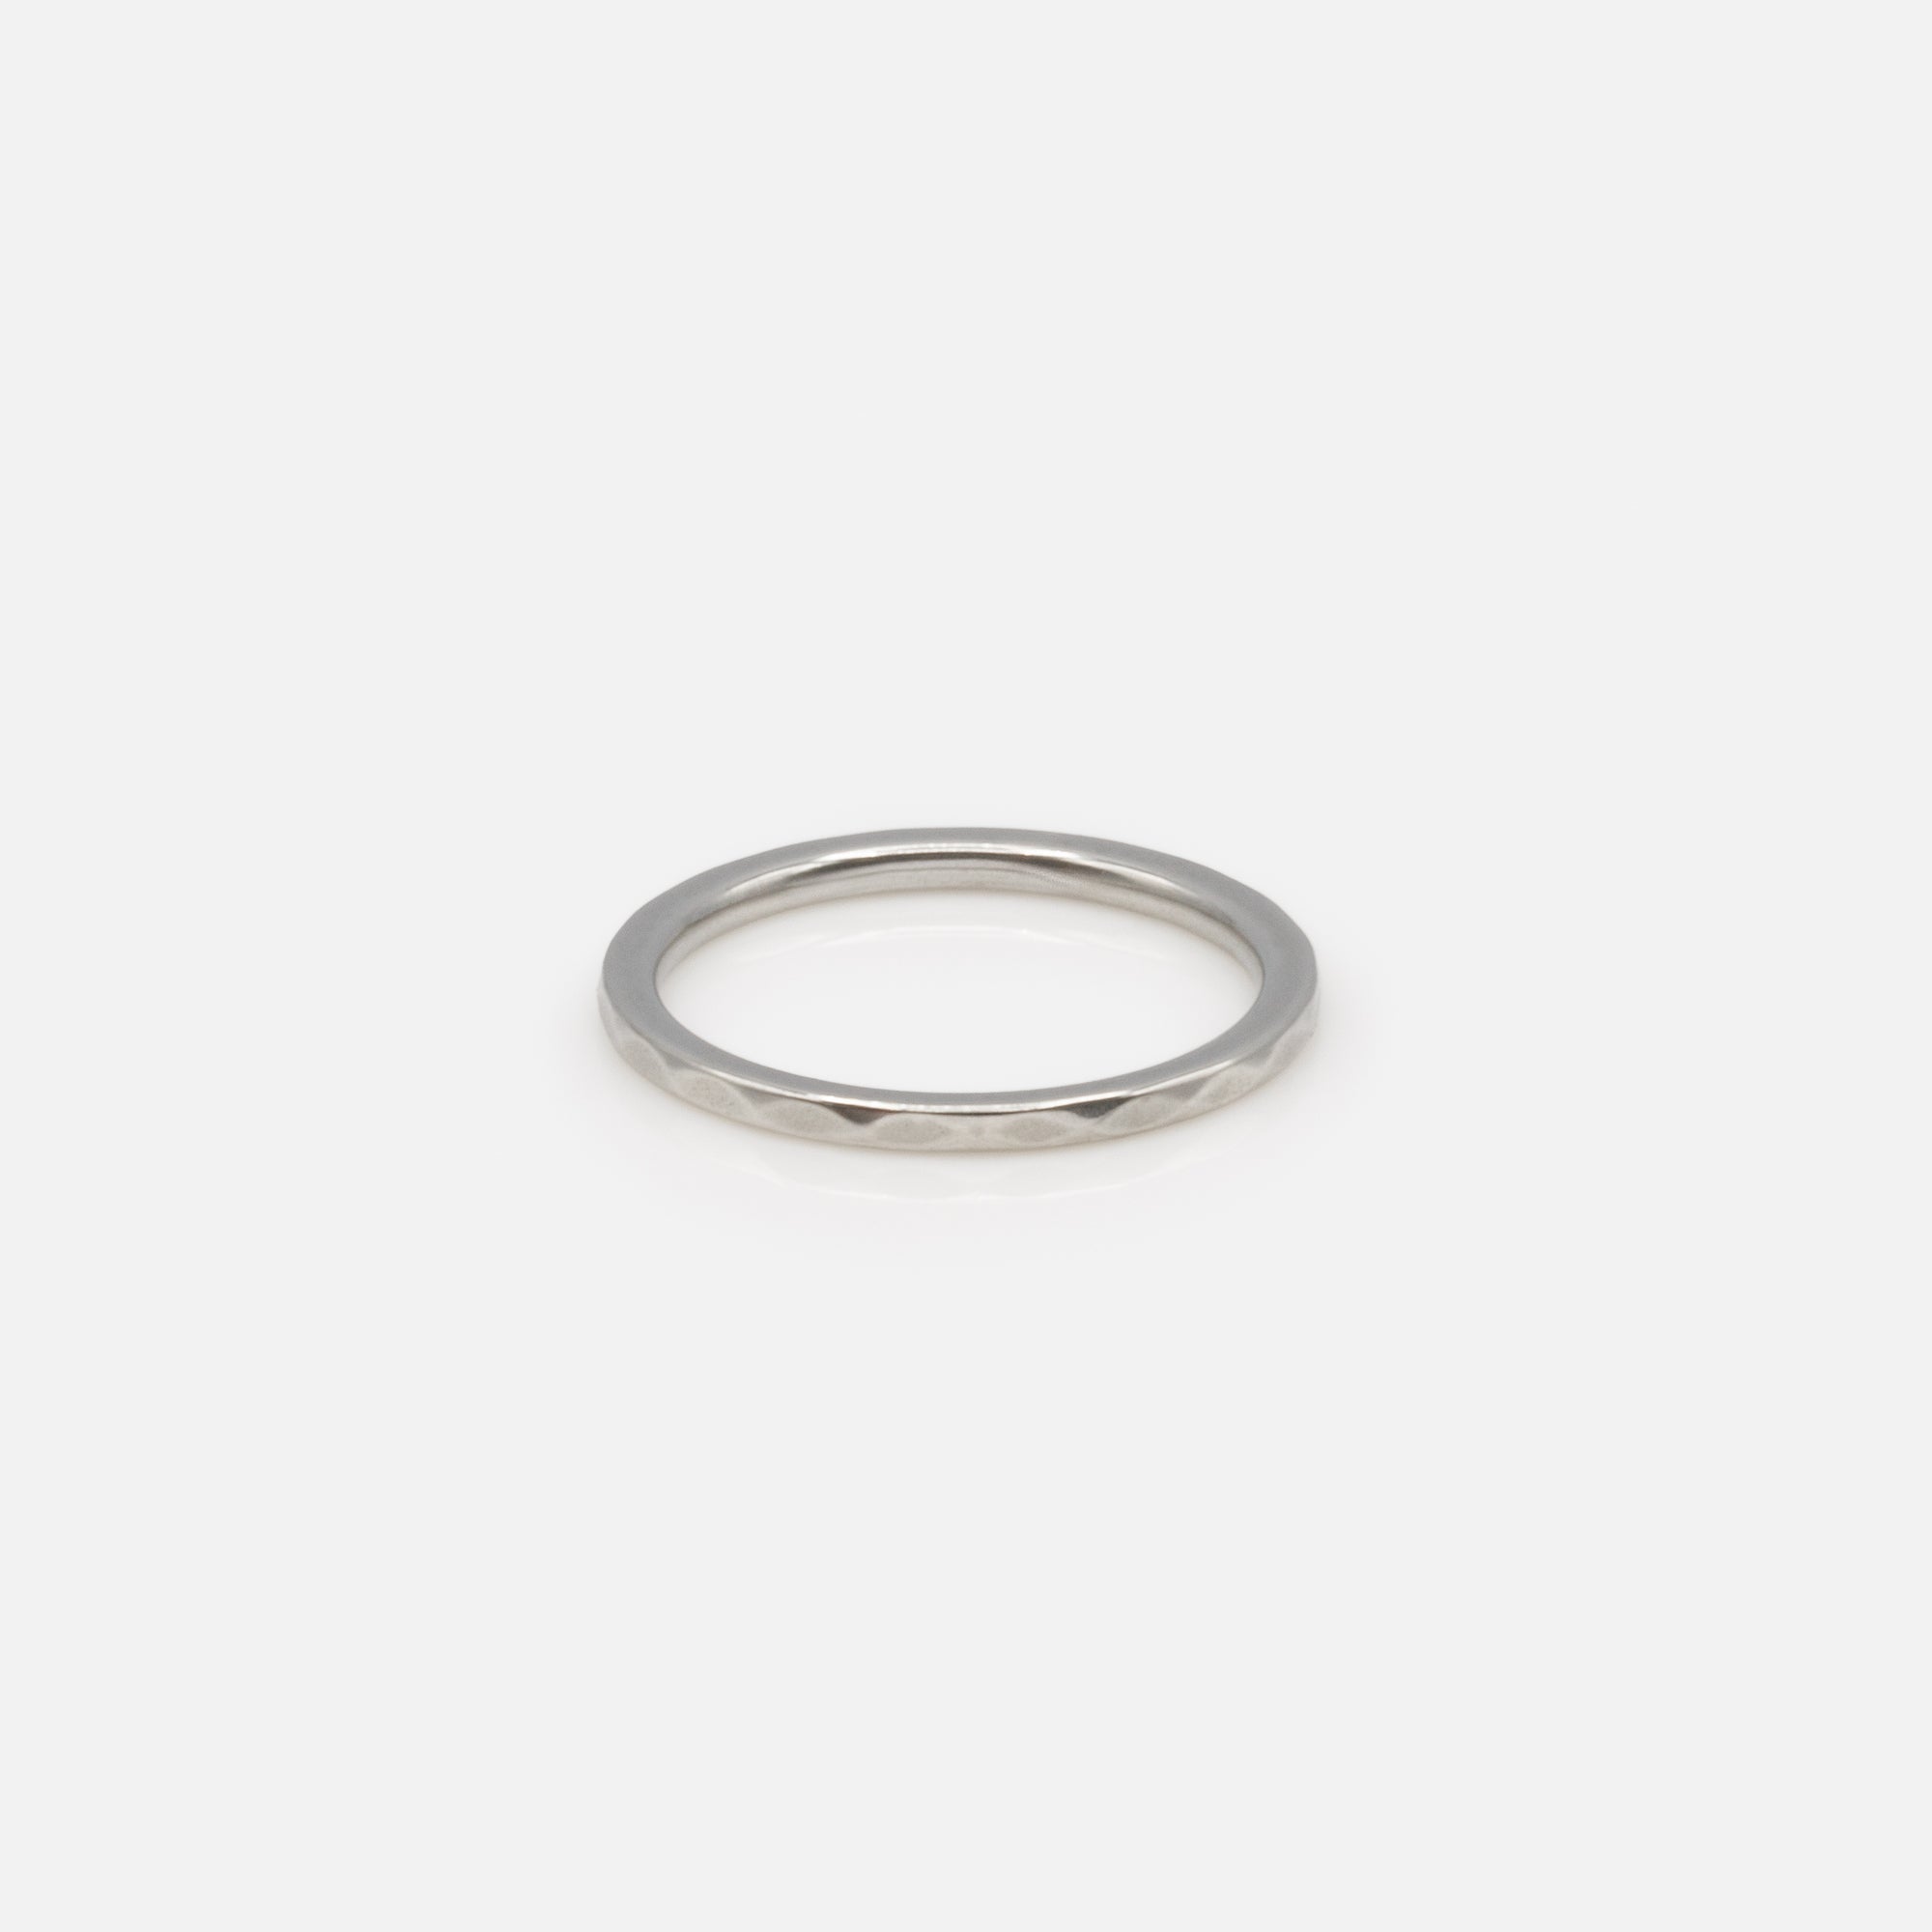 Trio of 3-tone textured stainless steel rings